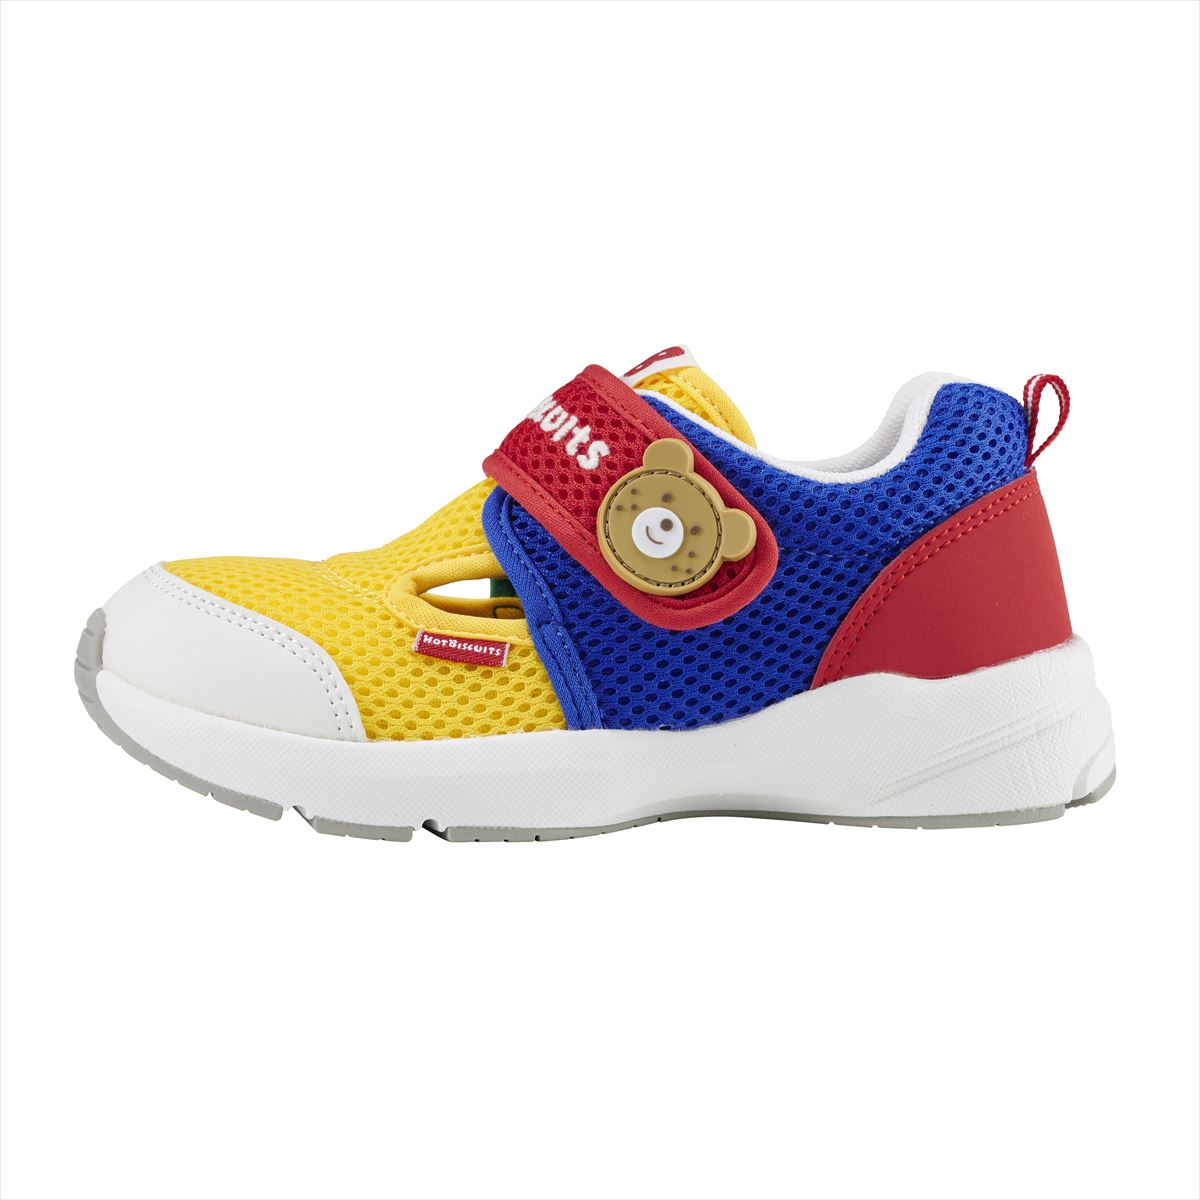 Double Russell Mesh Sneakers for Kids - HB Energy